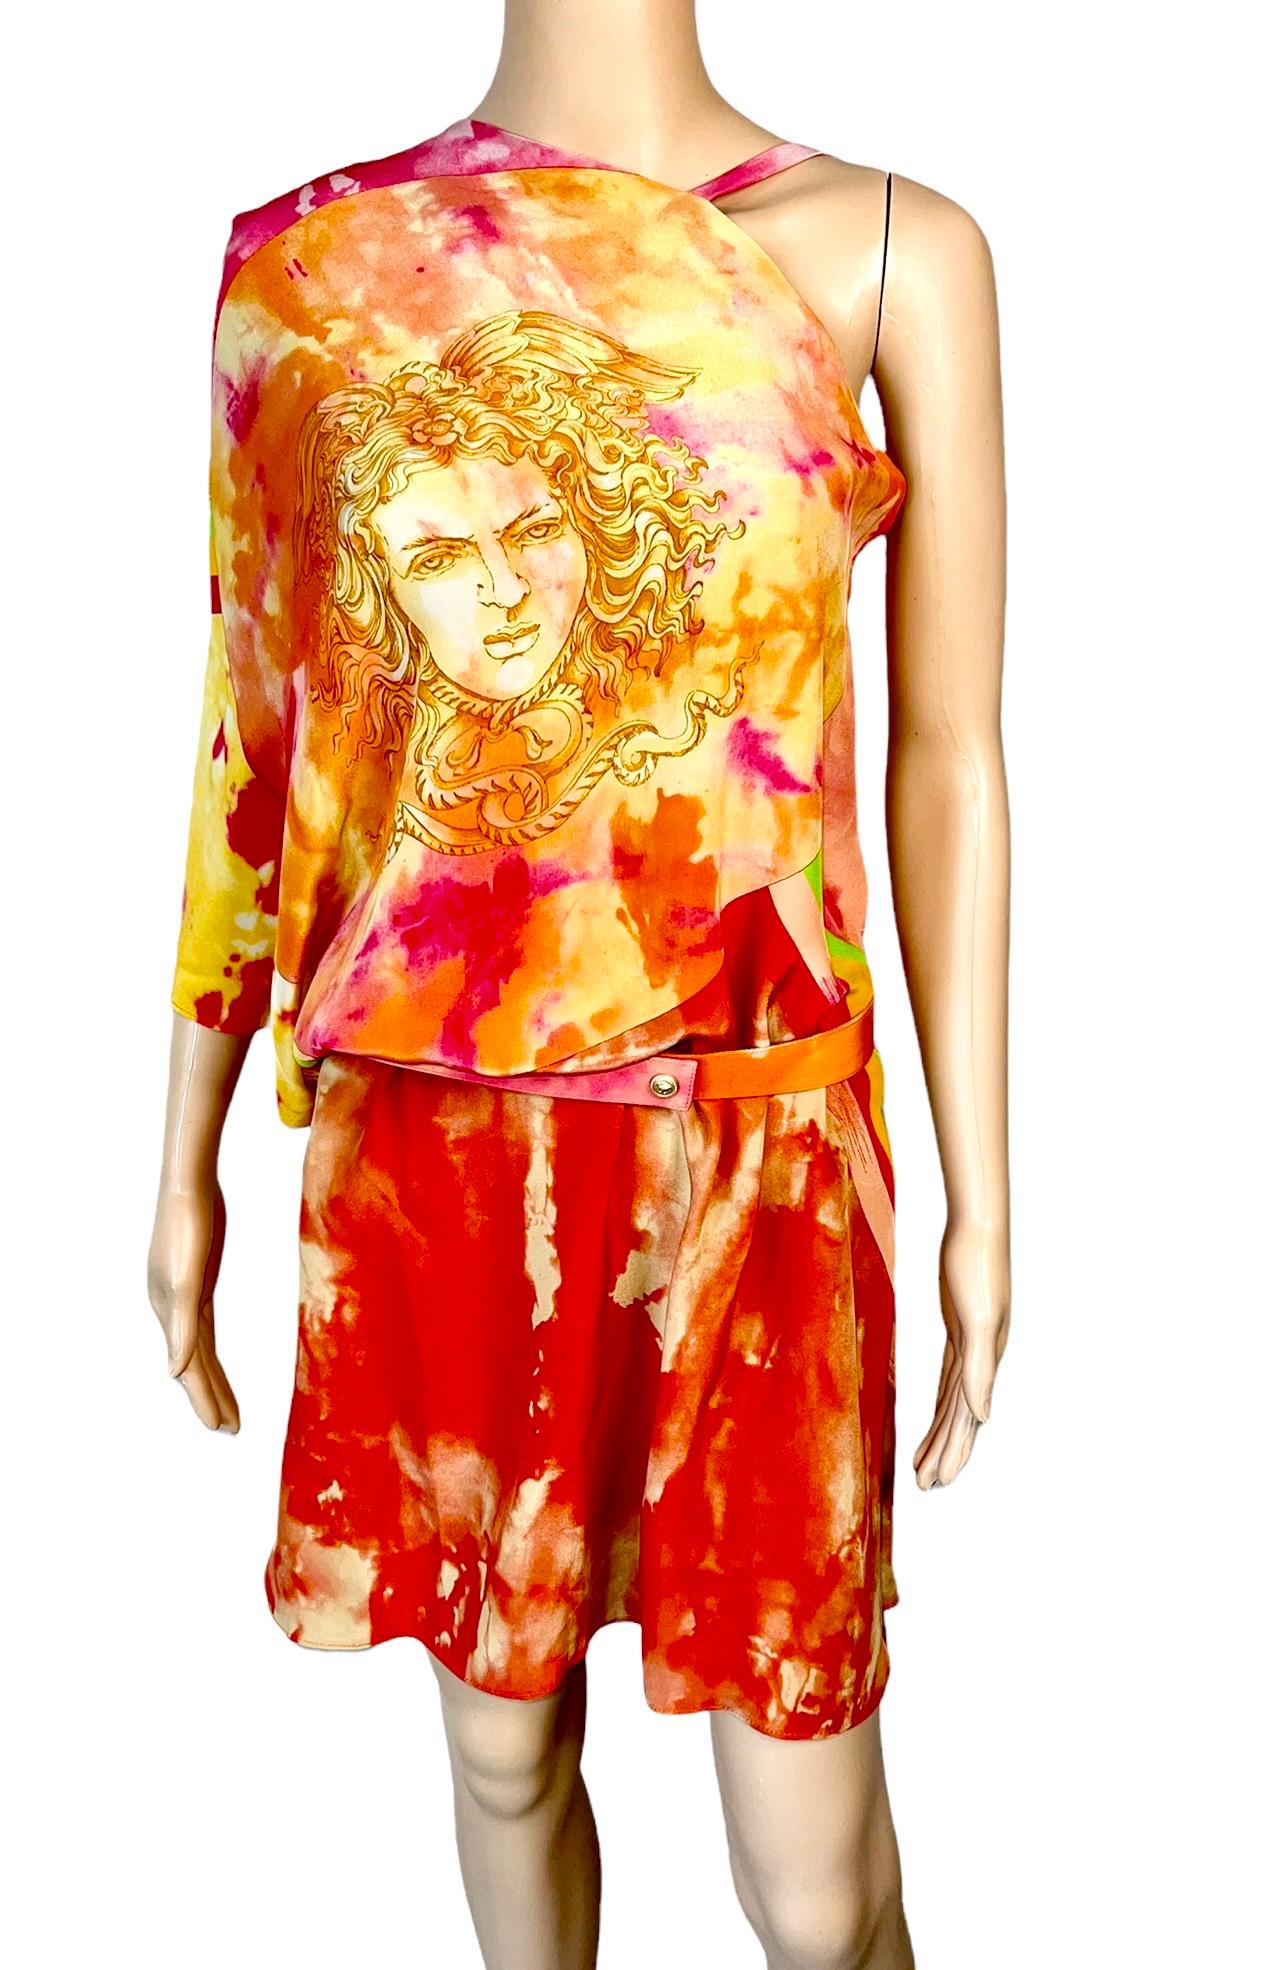 Versace S/S 2013 Runway Medusa Tie Dye Print Cutout Back Belted Mini Dress IT 42

Look 36 from the Spring 2013 Collection.

